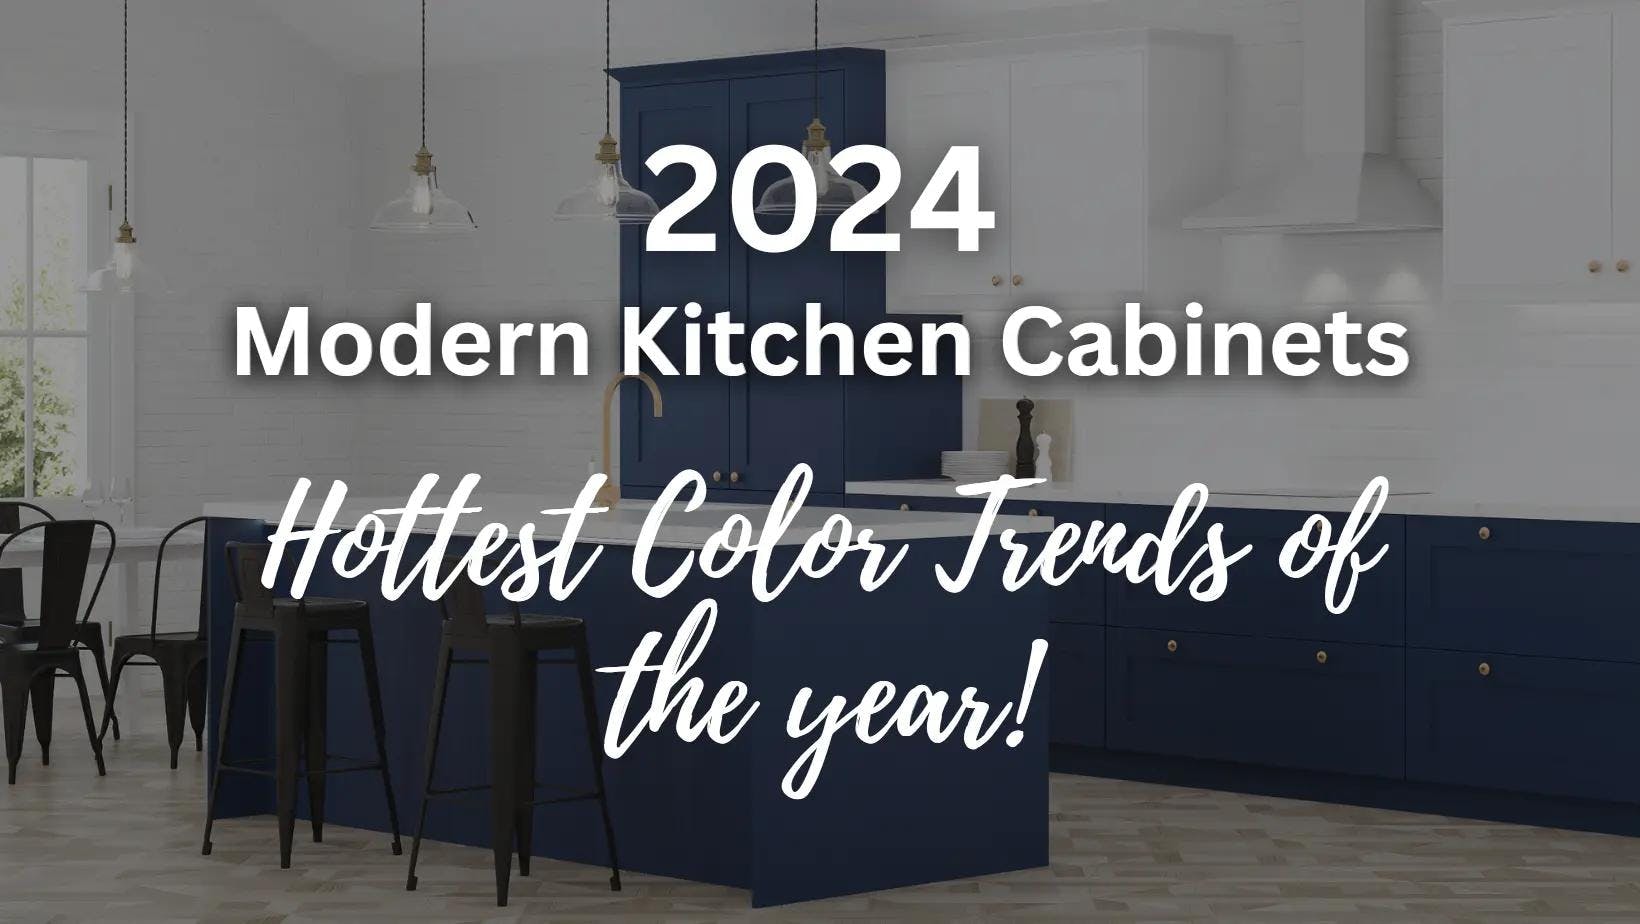 2024 Modern Kitchen Cabinets - Hottest Color Trends this Year